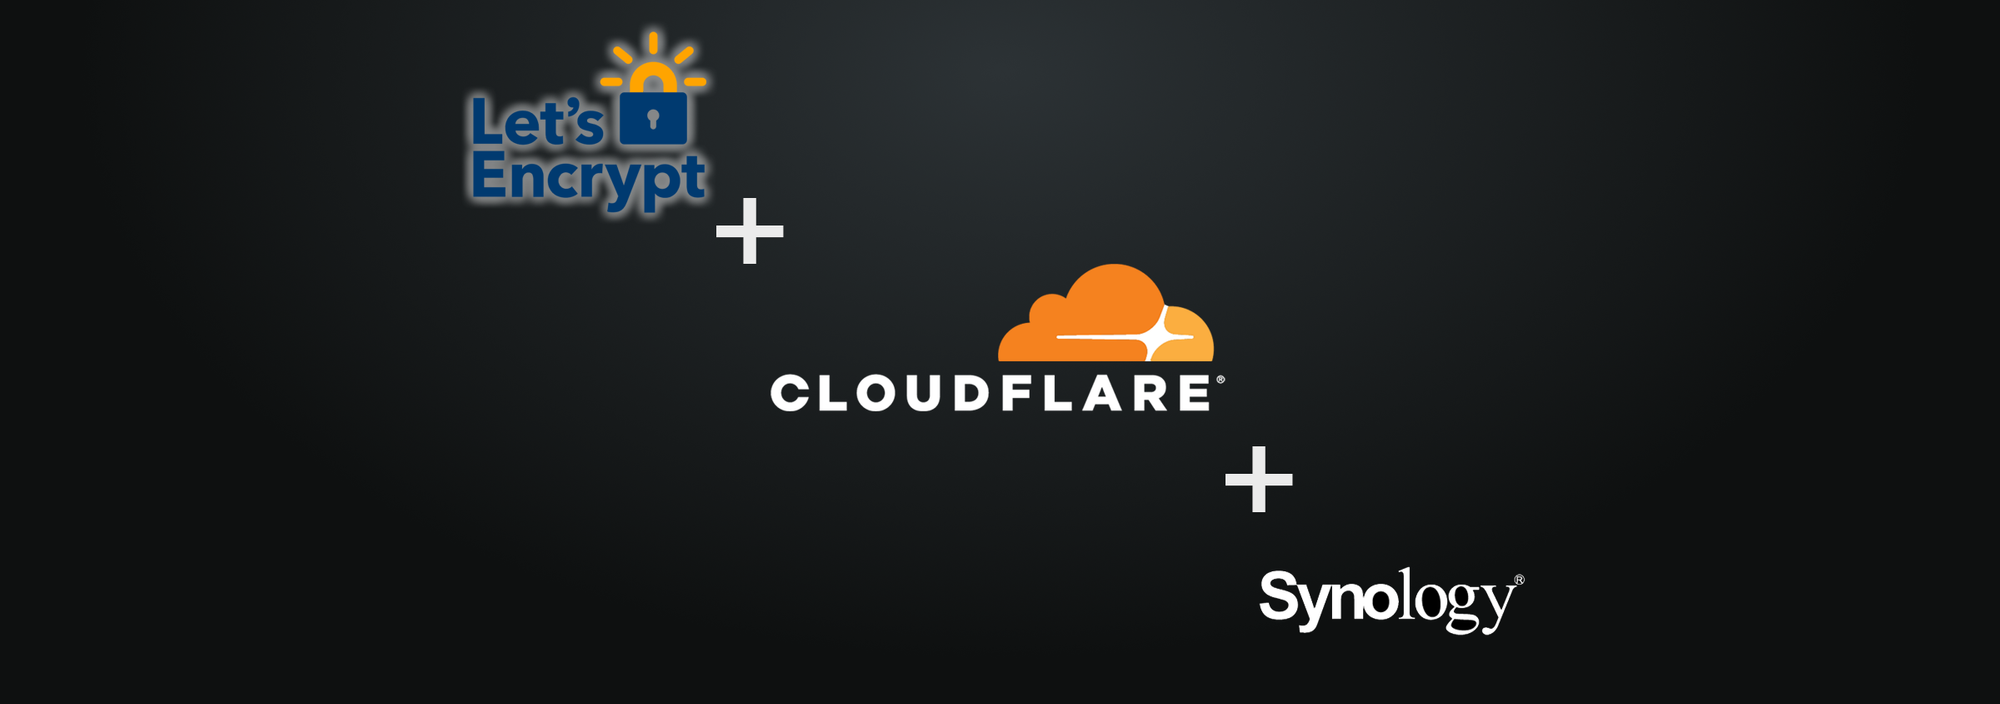 Generate a 
Let's Encrypt wildcard certificate on Synology with Docker and Cloudflare